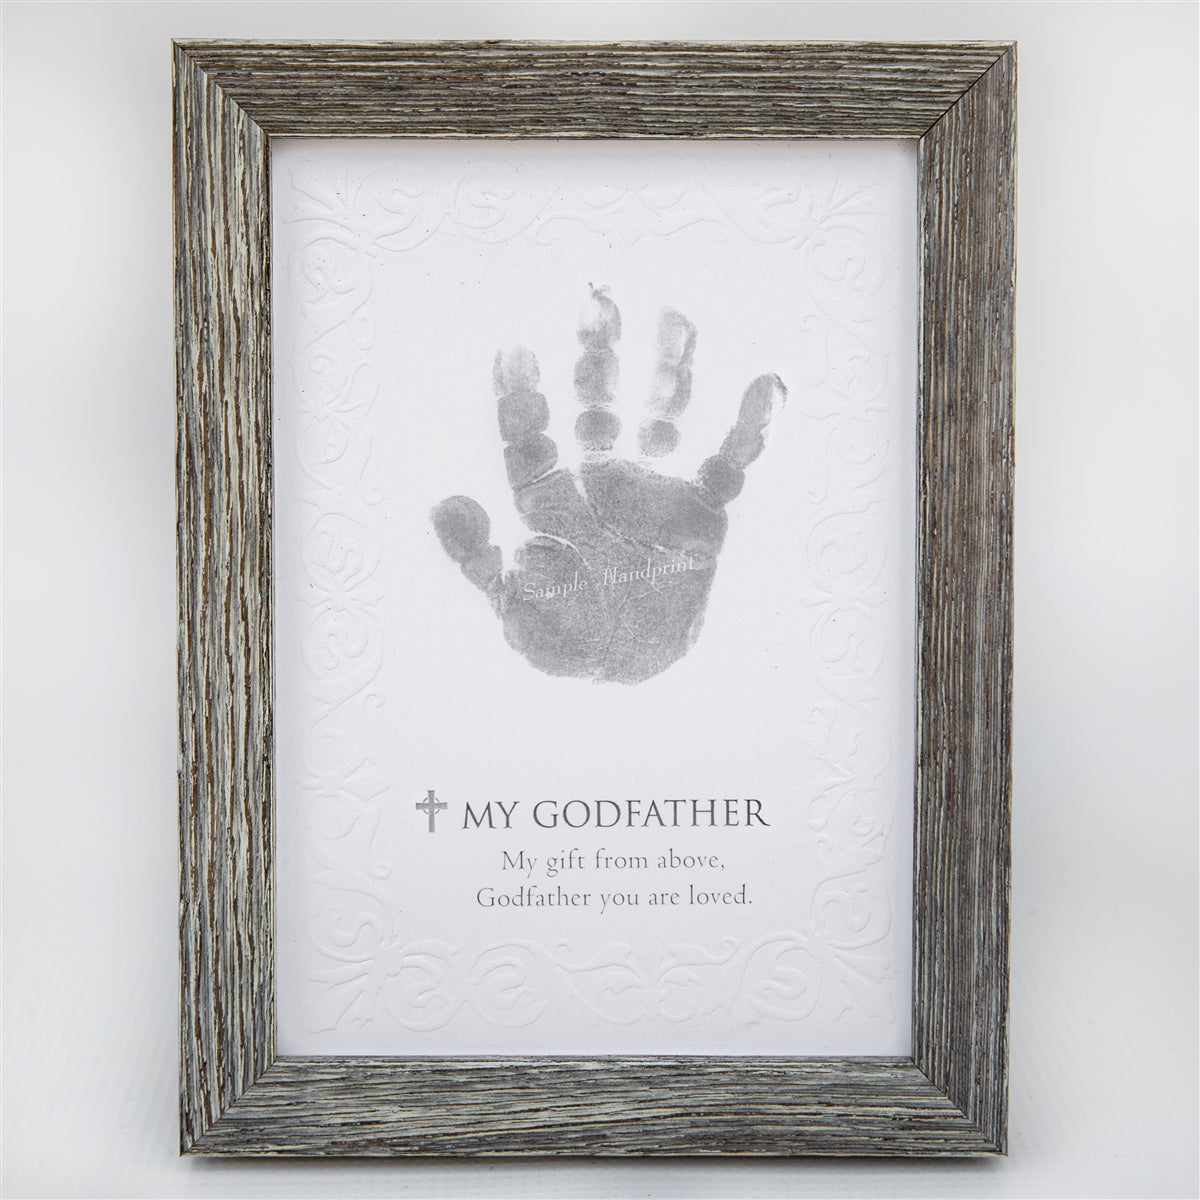 5x7 farmhouse frame with &quot;My Godfather&quot; sentiment on embossed cardstock with space for a child&#39;s handprint.